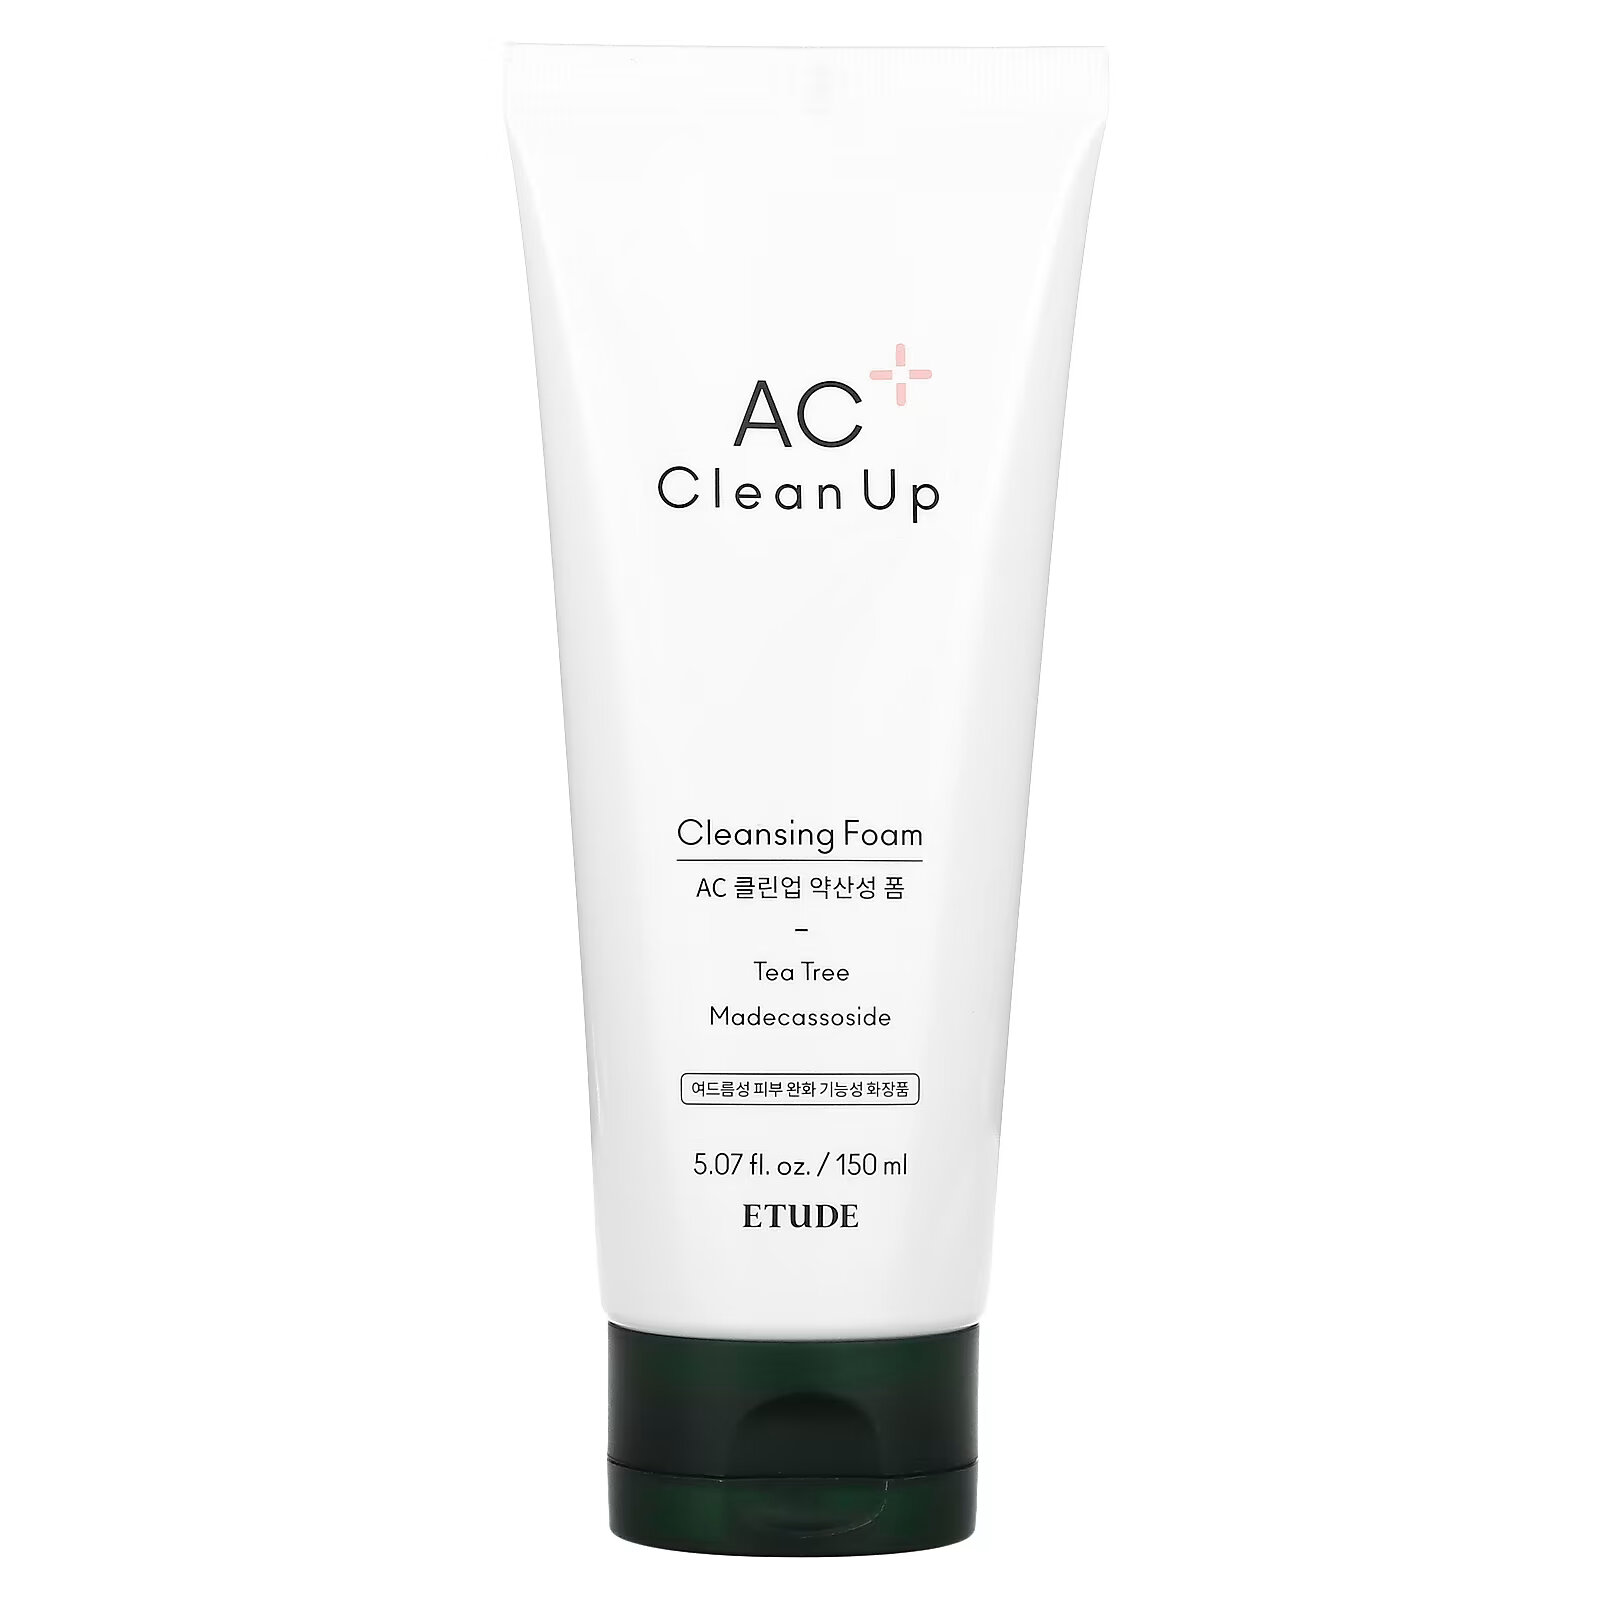 Cleansing up. Etude House AC clean up Cleansing Foam,150ml. Etude House AC clean up Daily Cleansing Foam. Etude House пенка для умывания AC clean up Daily acne Cleansing Foam. Et.AC.C. Cleansing Foam 150ml('20) Etude House.